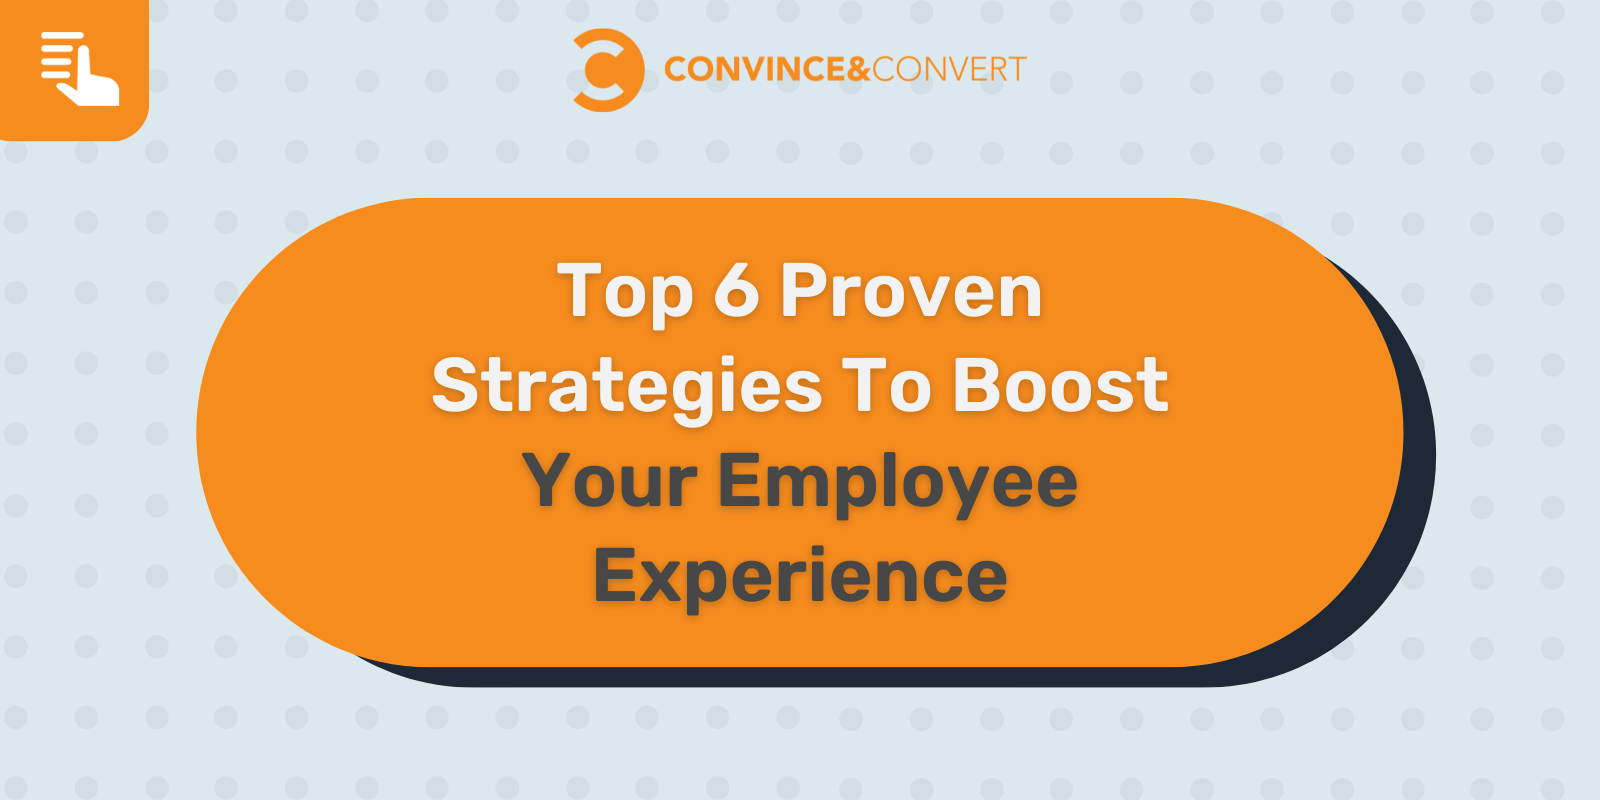 Top 6 Proven Strategies To Boost Your Employee Experience